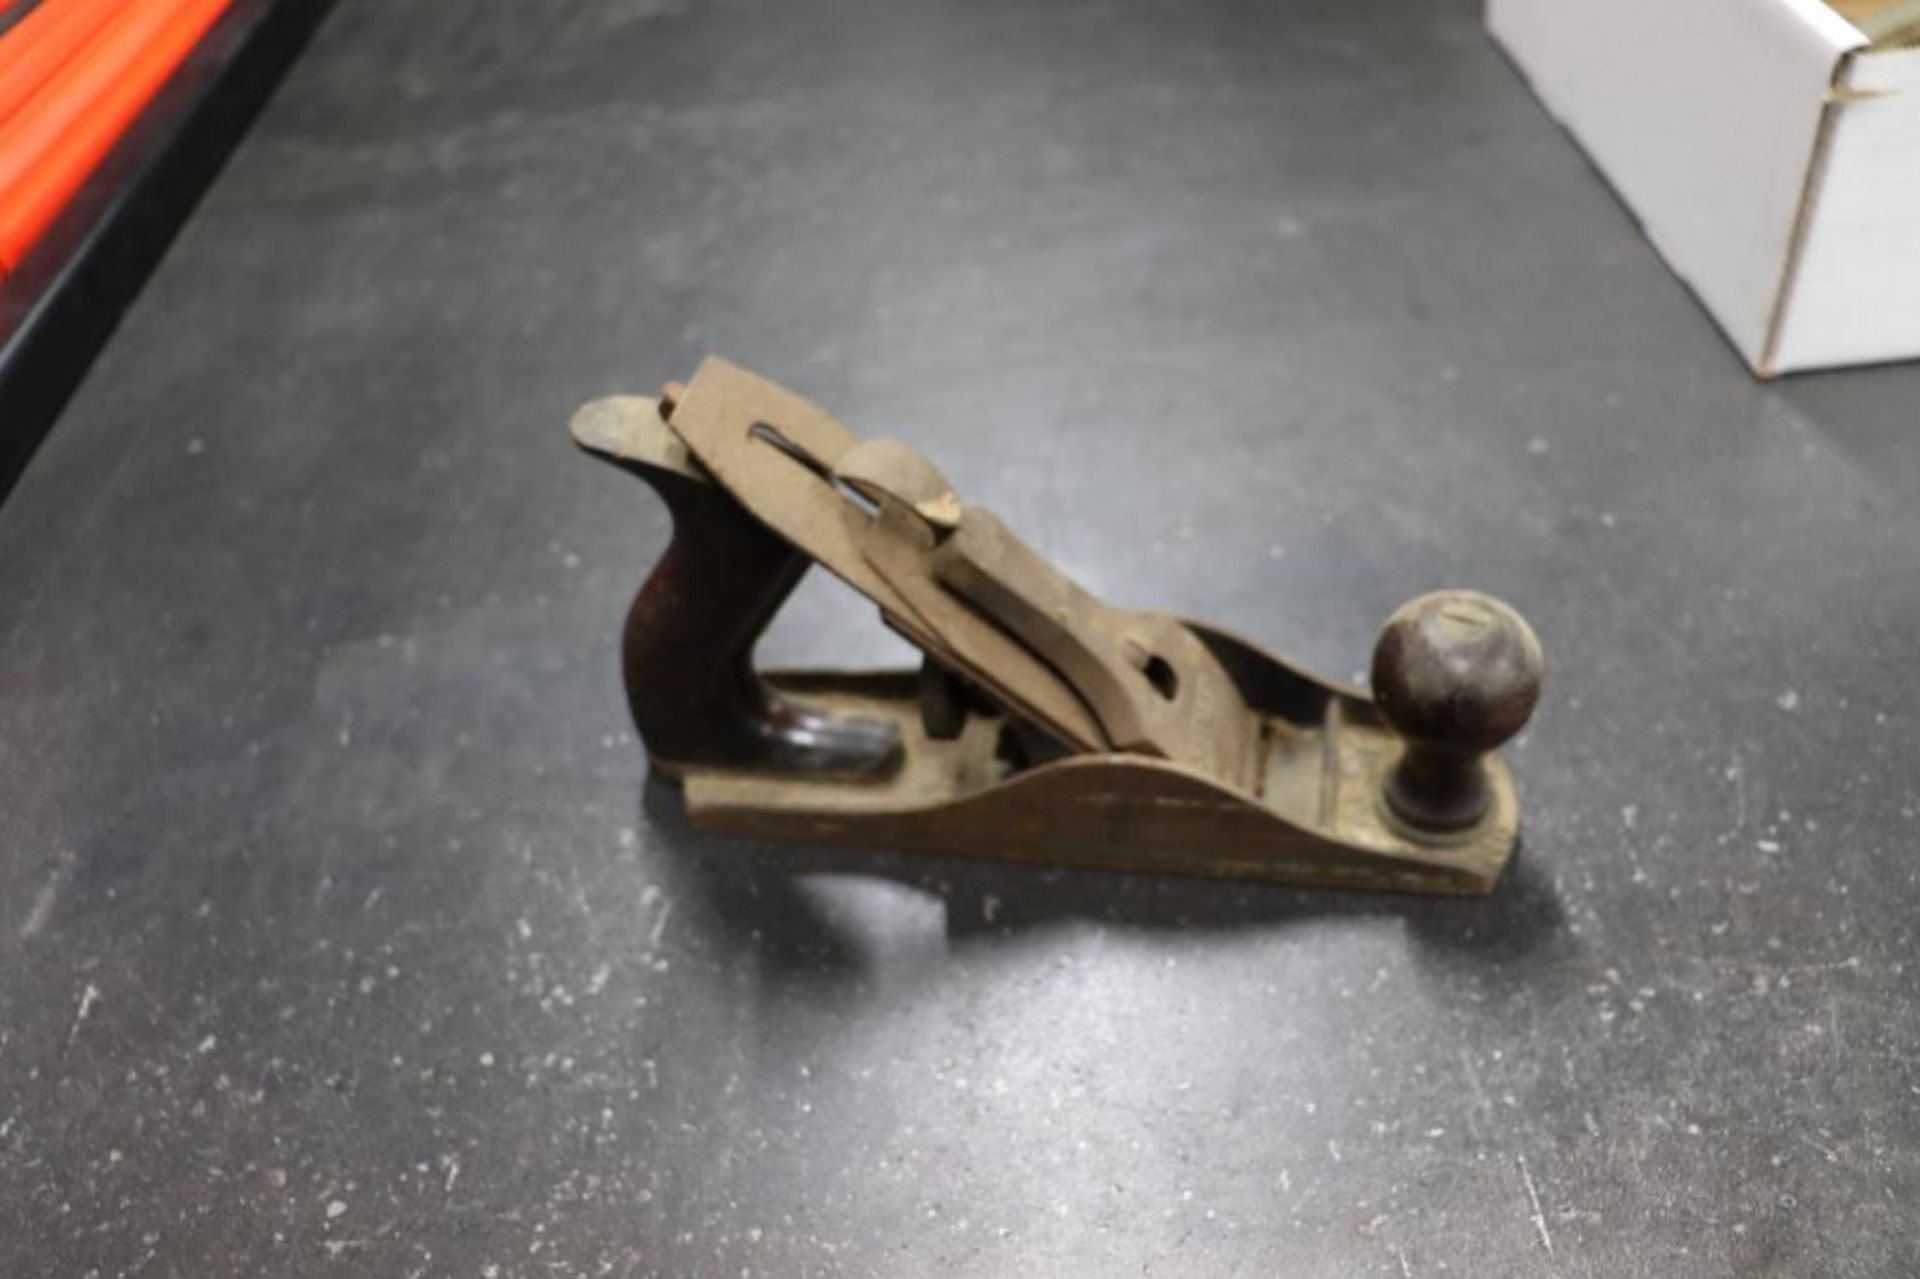 Stanley plane & jig saw drill attachment - Image 6 of 7